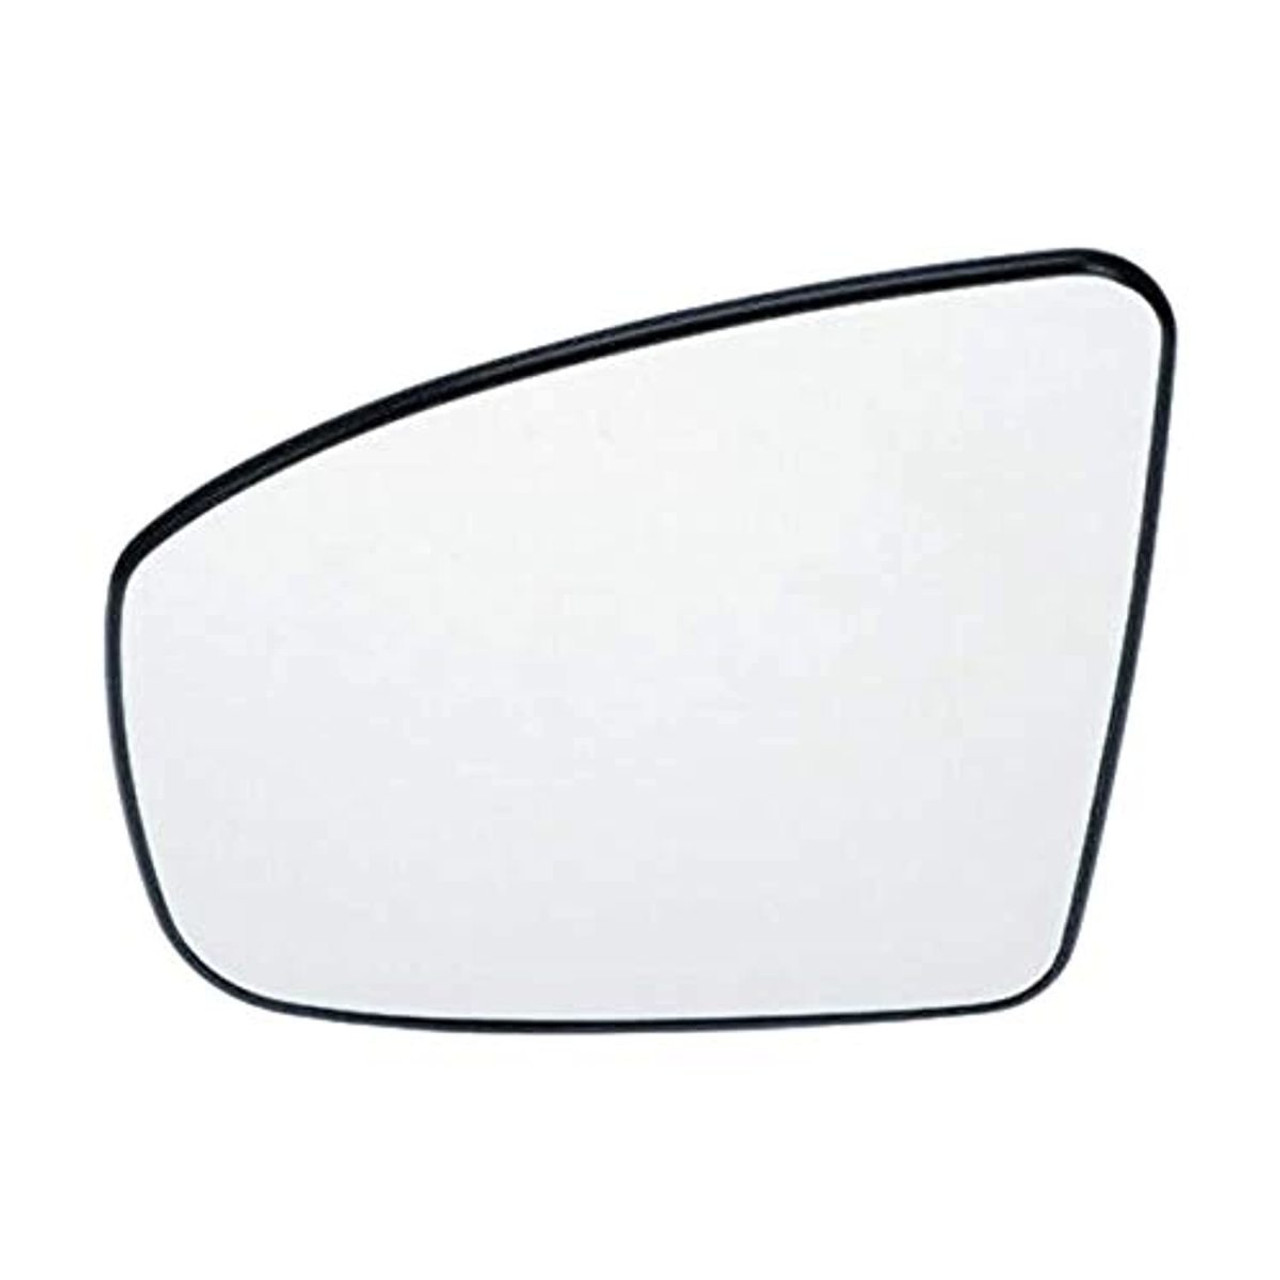 Fits 13-16 Pathfinder Left Driver Mirror Glass w/Holder OE